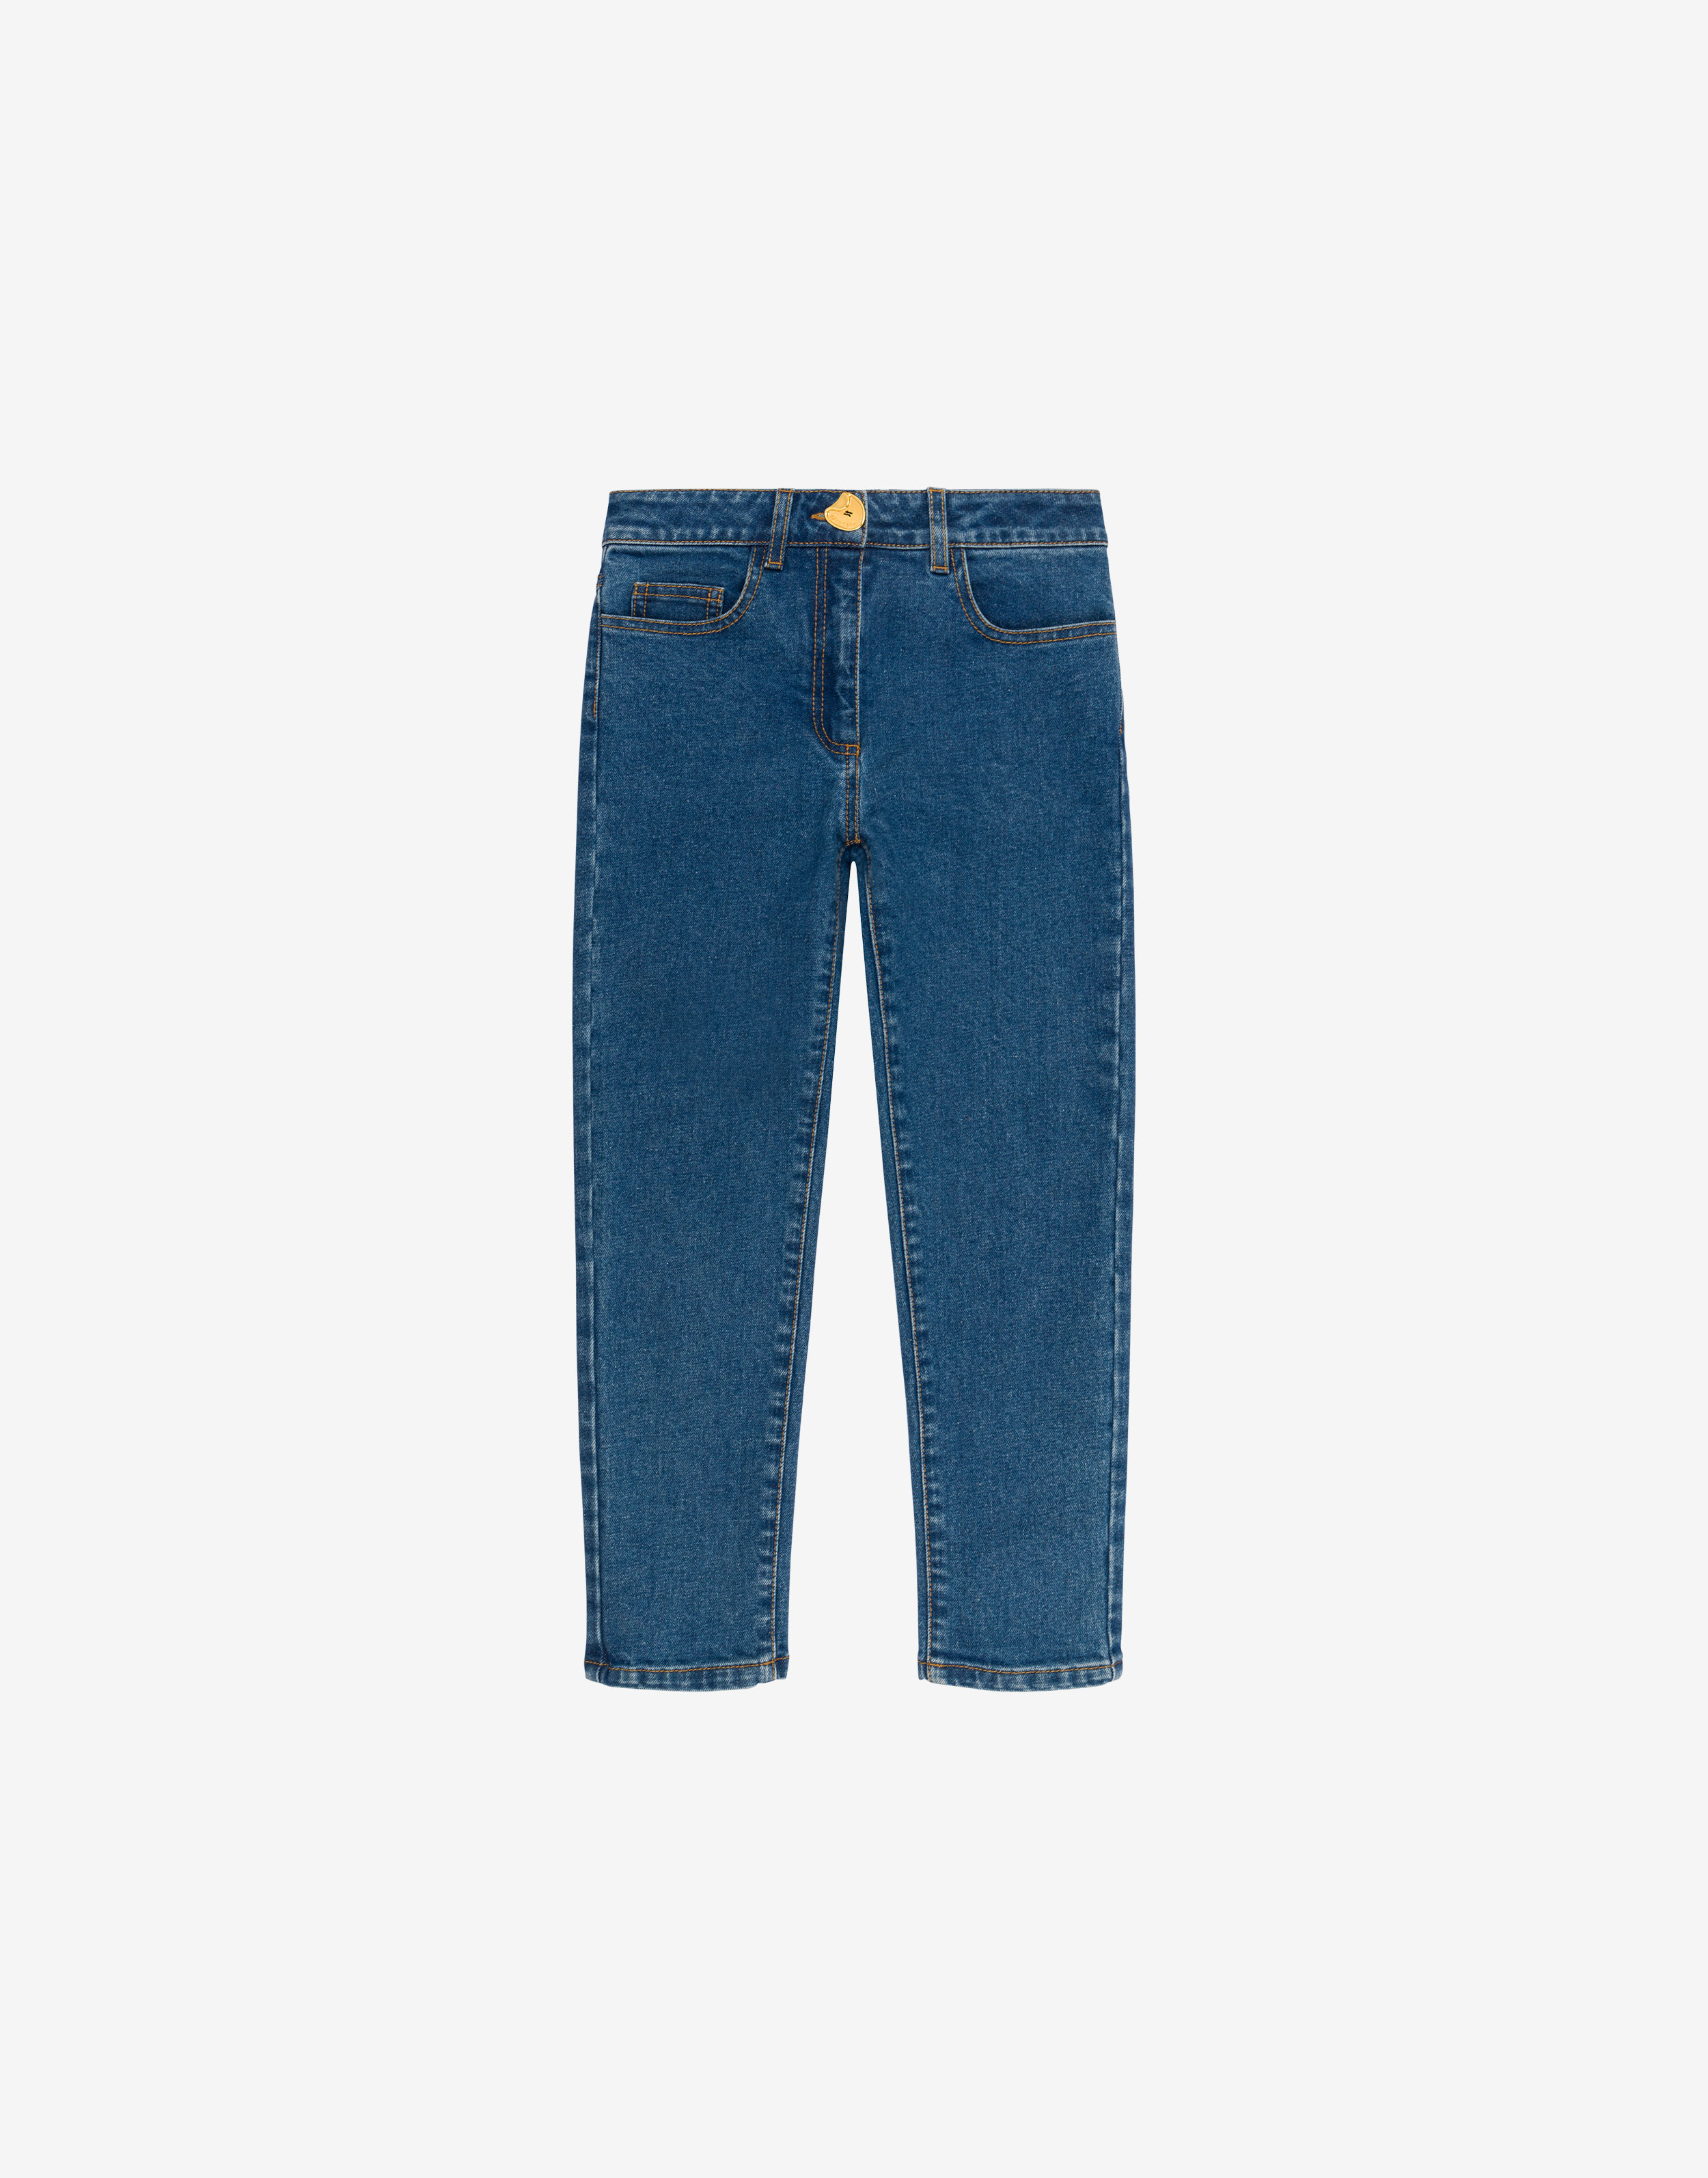 Morphed Button stretch denim trousers